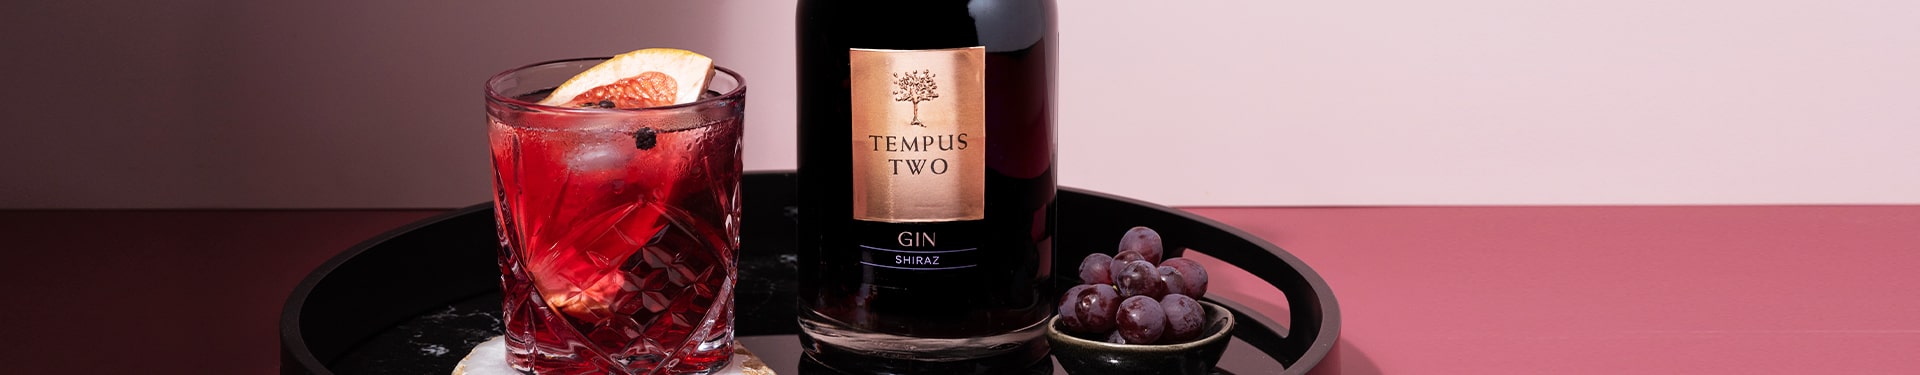 Bottle and glass of Tempus Two Shiraz gin garnished with an orange, next to a bunch of grapes